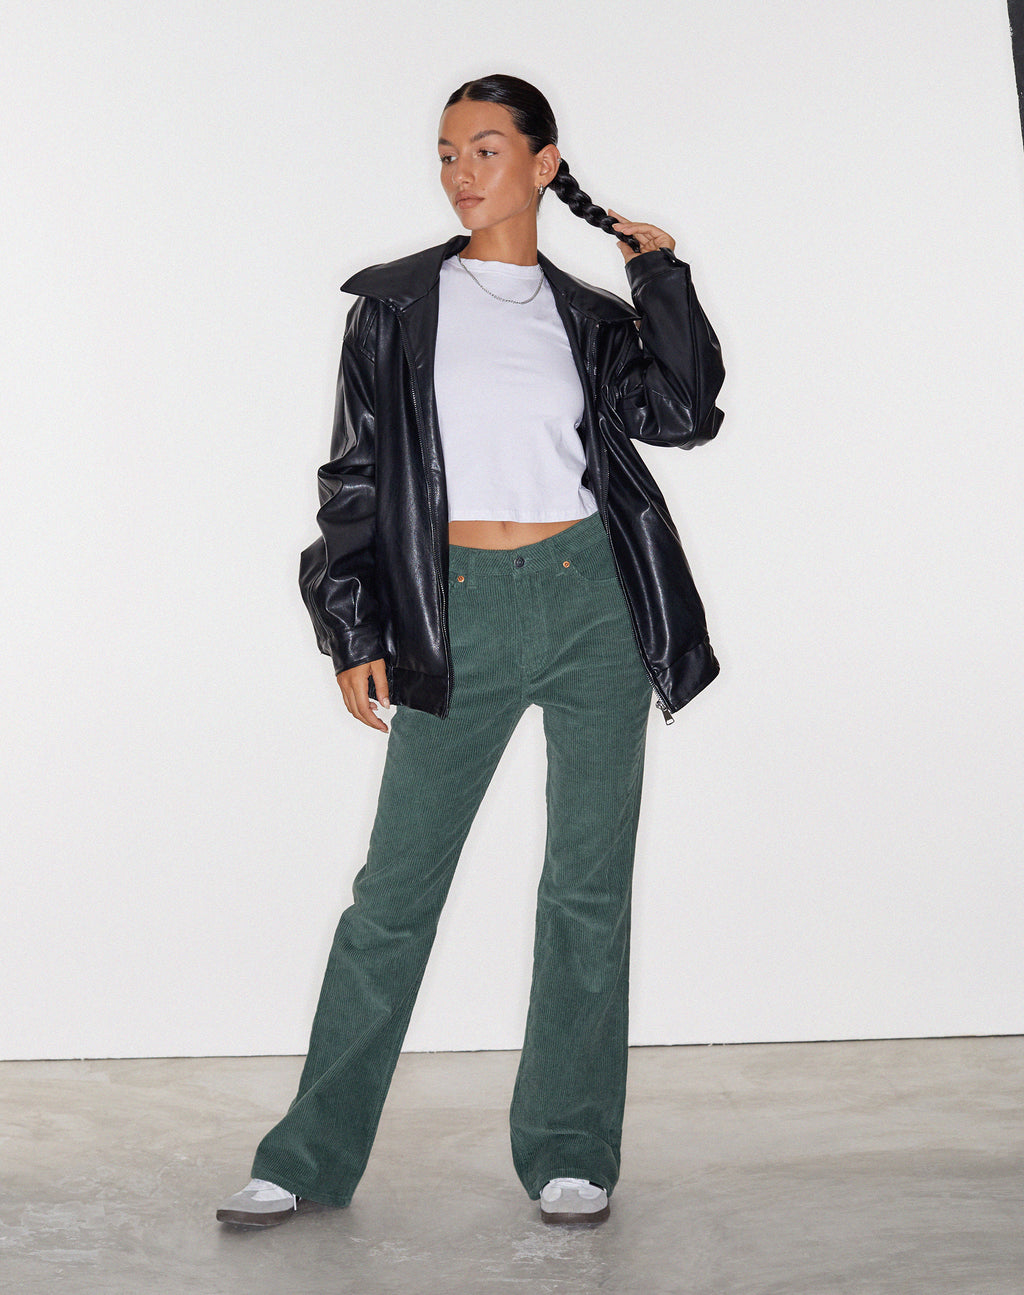 MOTEL X OLIVIA NEILL Bootleg Jeans in Cord Green